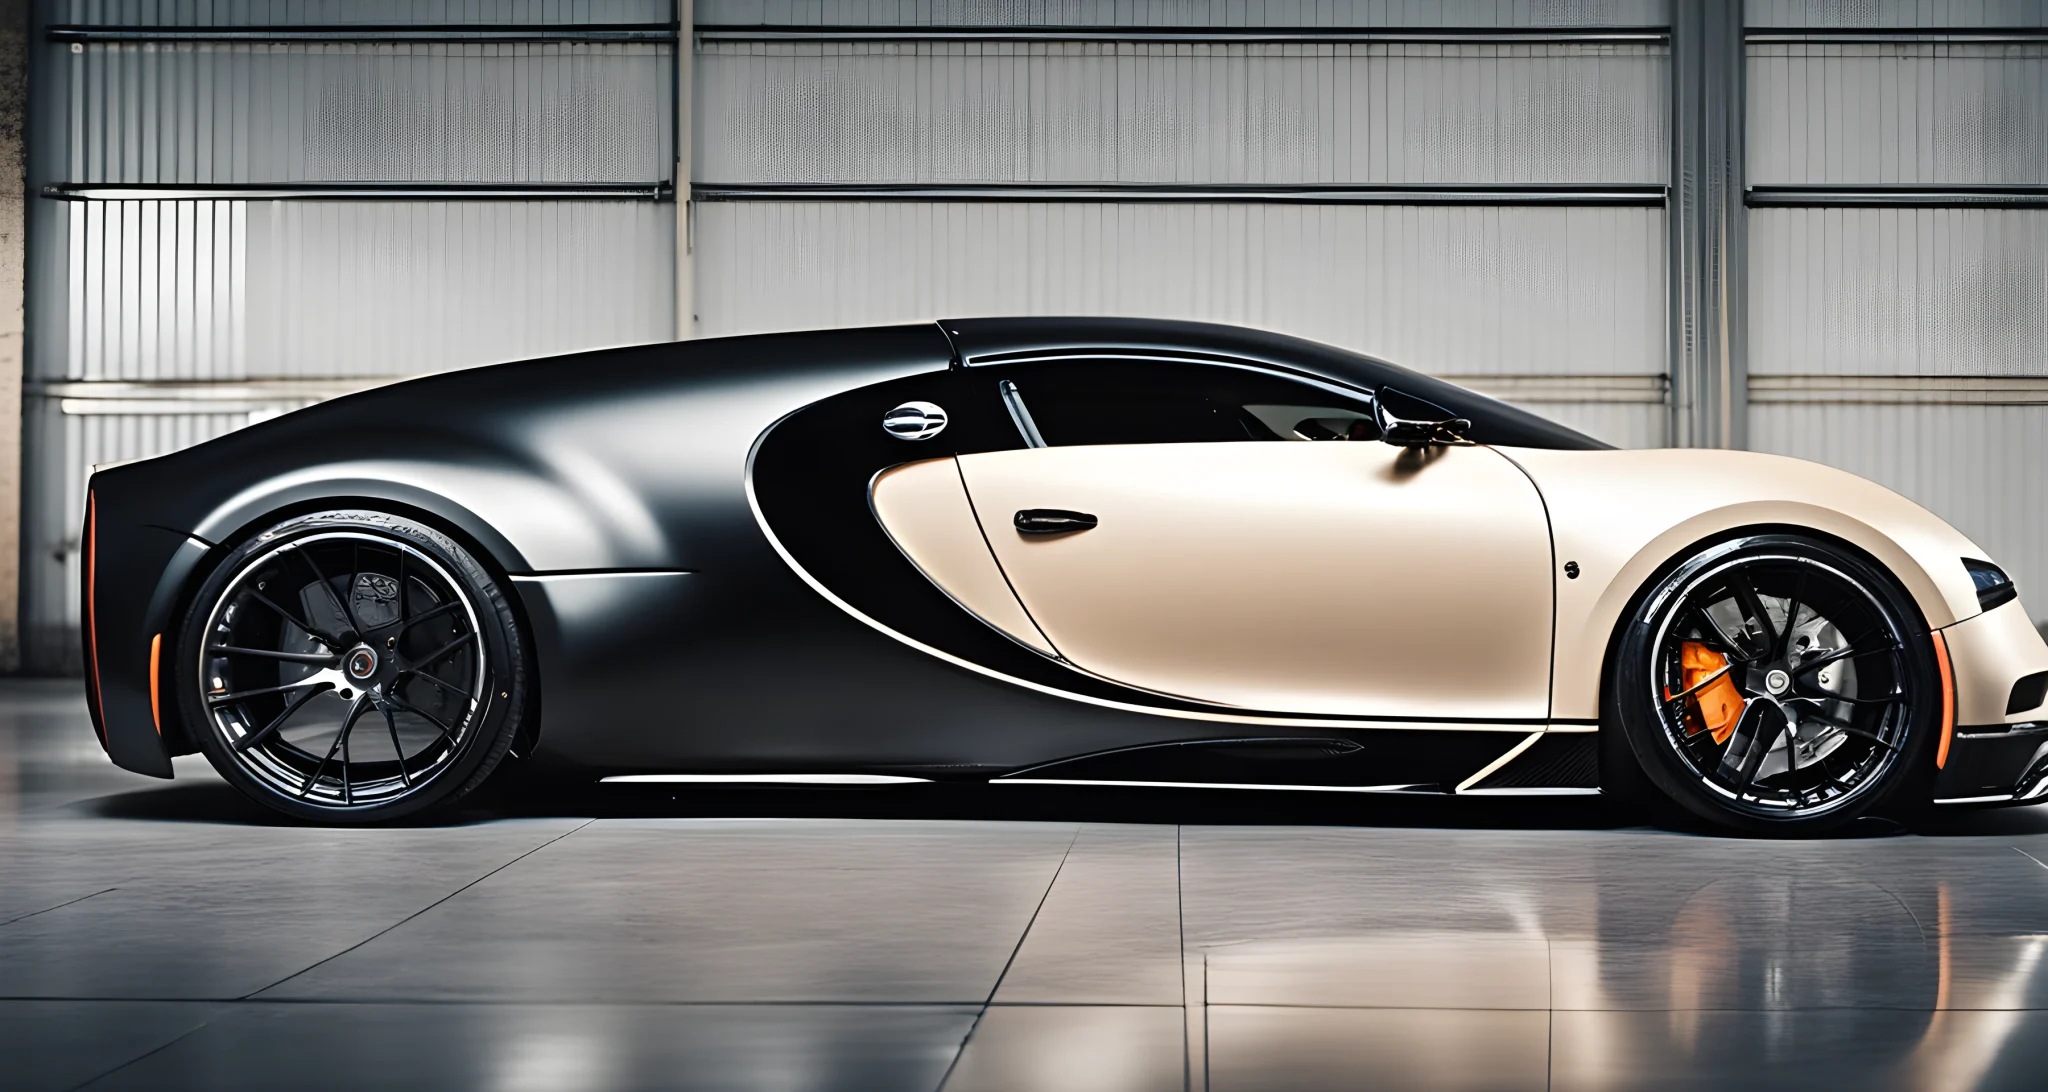 The image shows a sleek, high-performance Bugatti sports car with customized aerodynamic body kit, upgraded exhaust system, and larger alloy wheels.